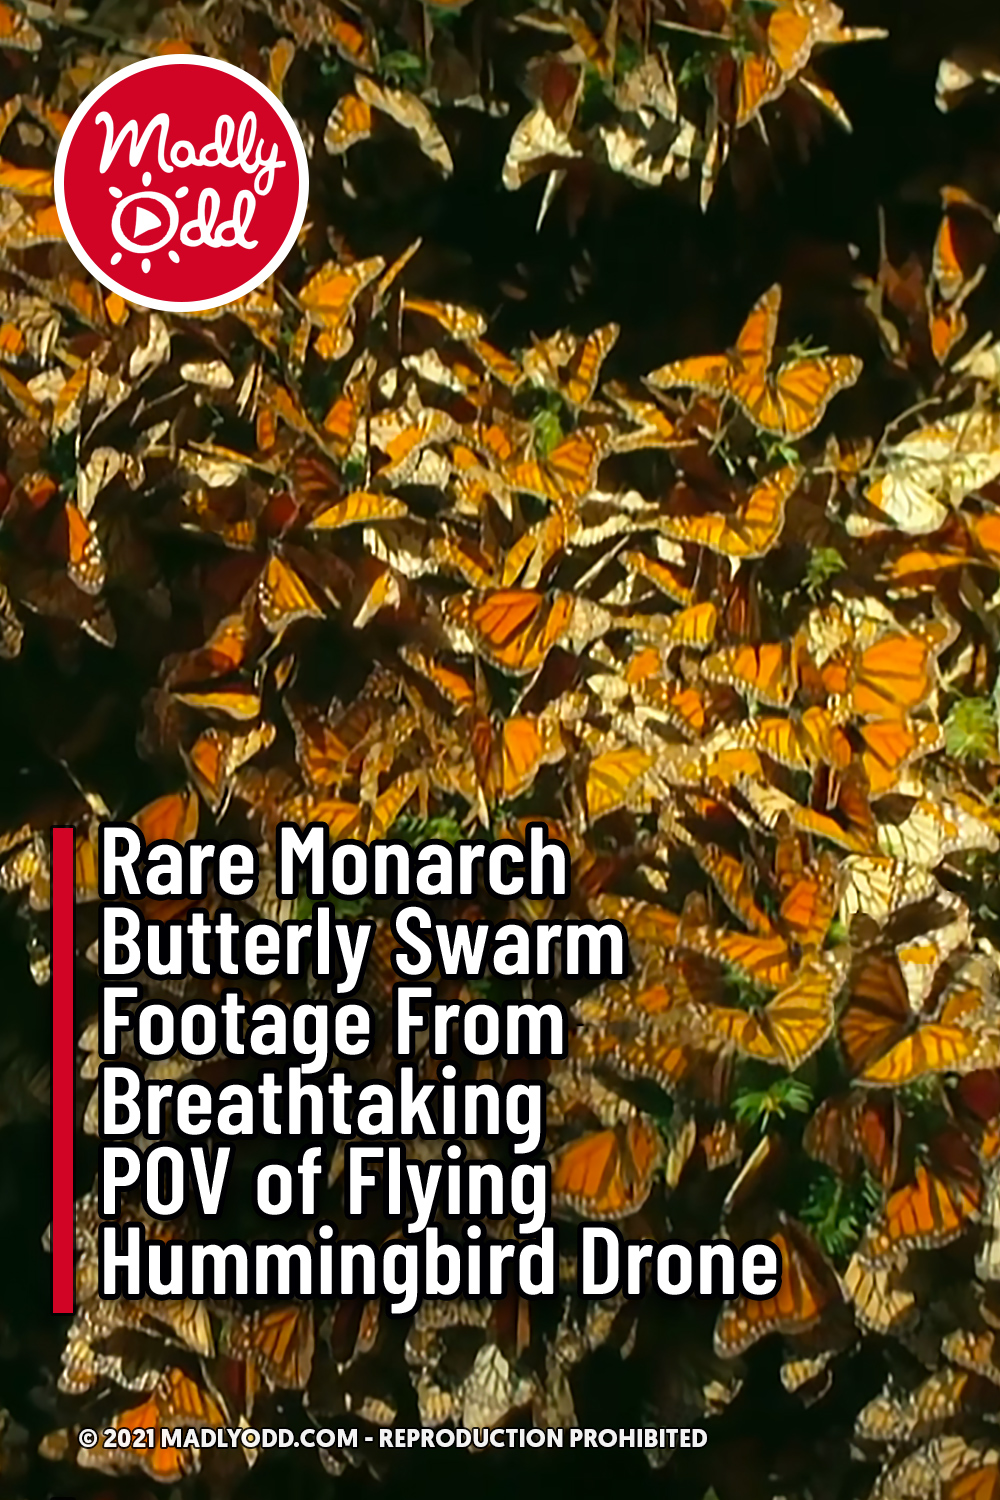 Rare Monarch Butterfly Swarm Footage From Breathtaking POV of Flying Hummingbird Drone